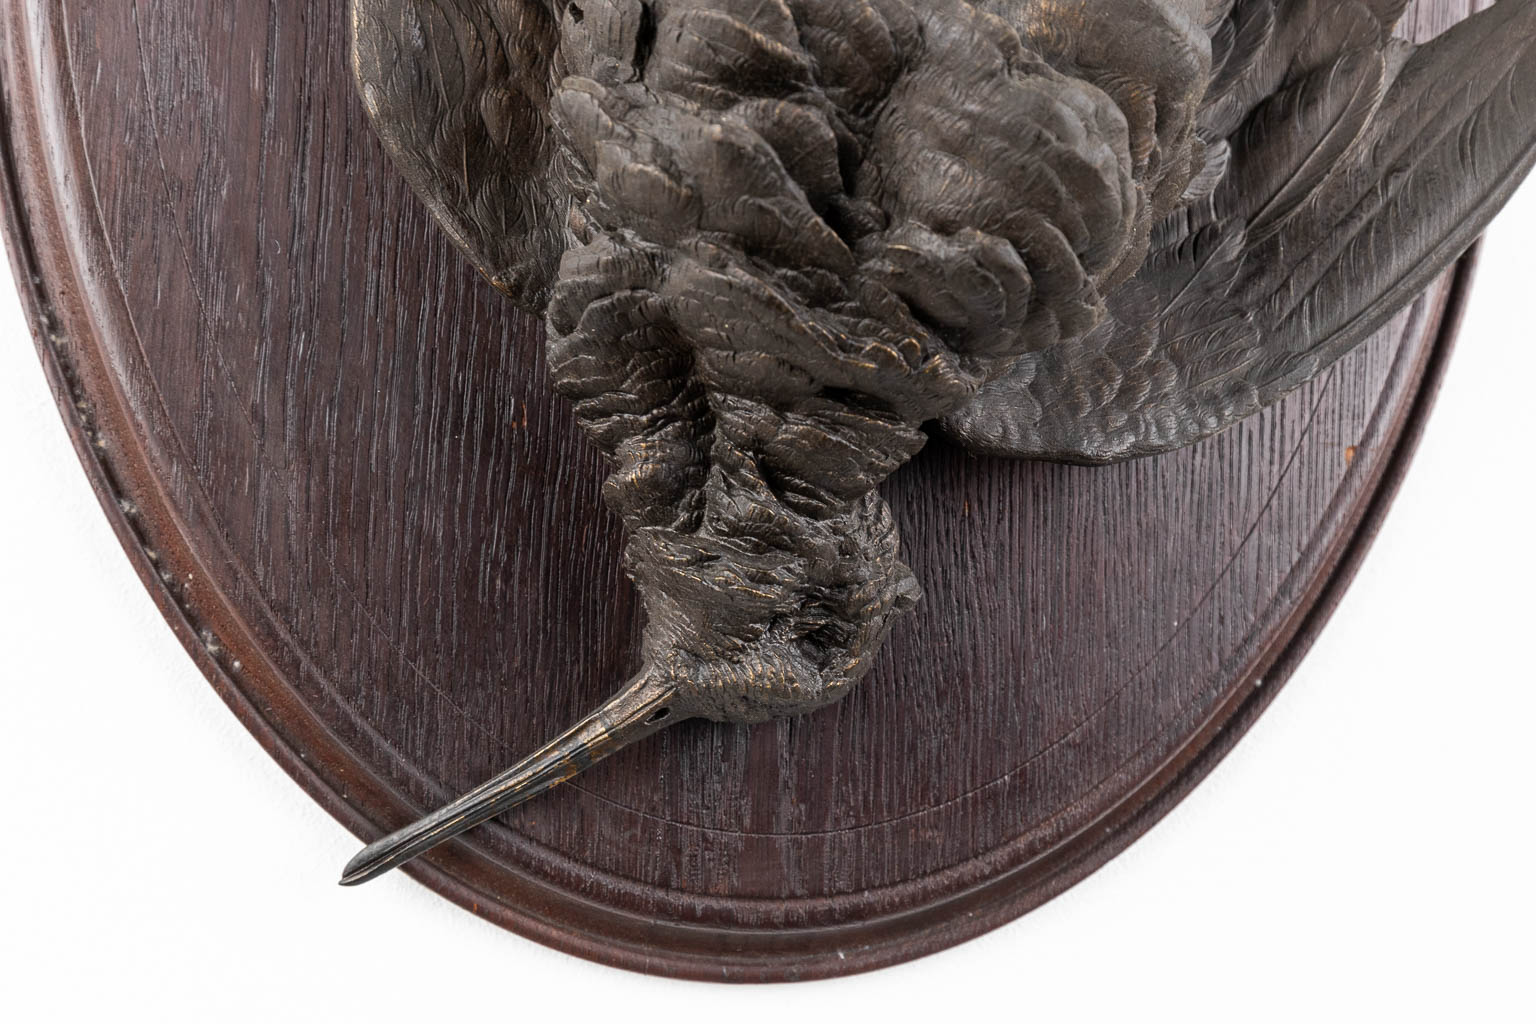 A pair of wall-mounted 'Hunting Trophies', patinated bronze mounted on wood. (D:7 x W:33 x H:46 cm) - Image 5 of 15